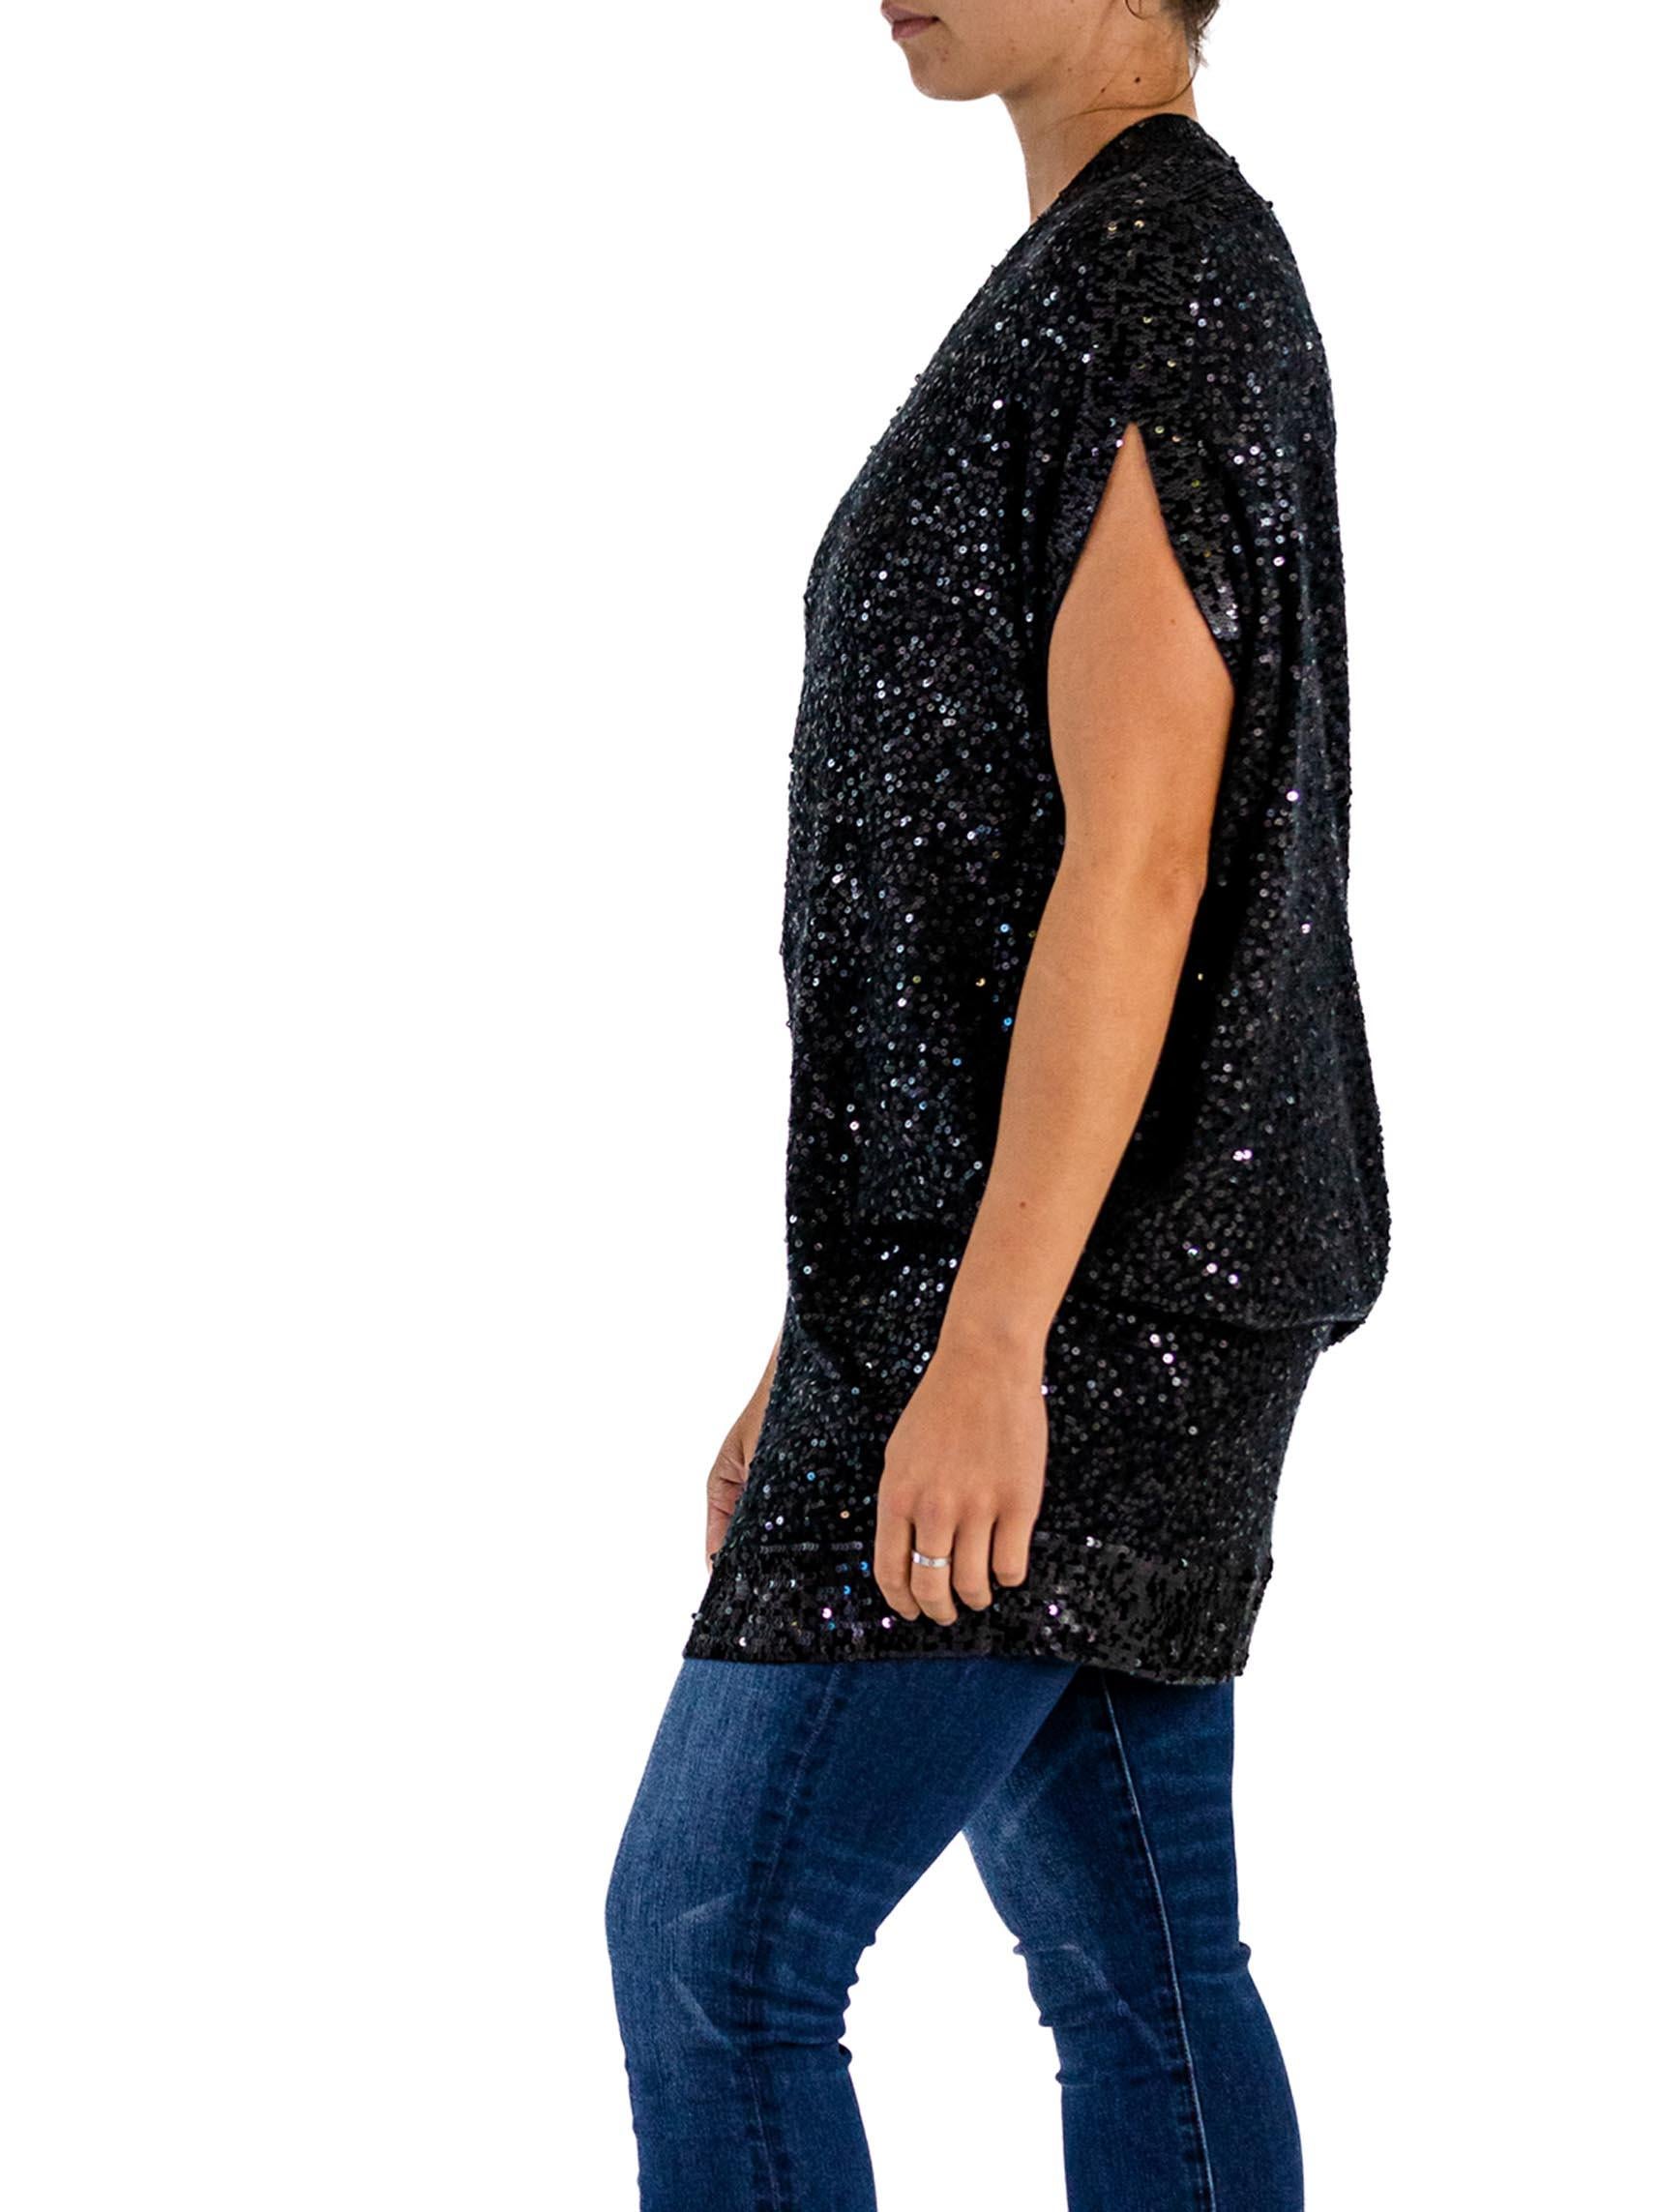 1990S DONNA KARAN Black Cashmere Blend Oversized Sequined Sweater In Excellent Condition For Sale In New York, NY